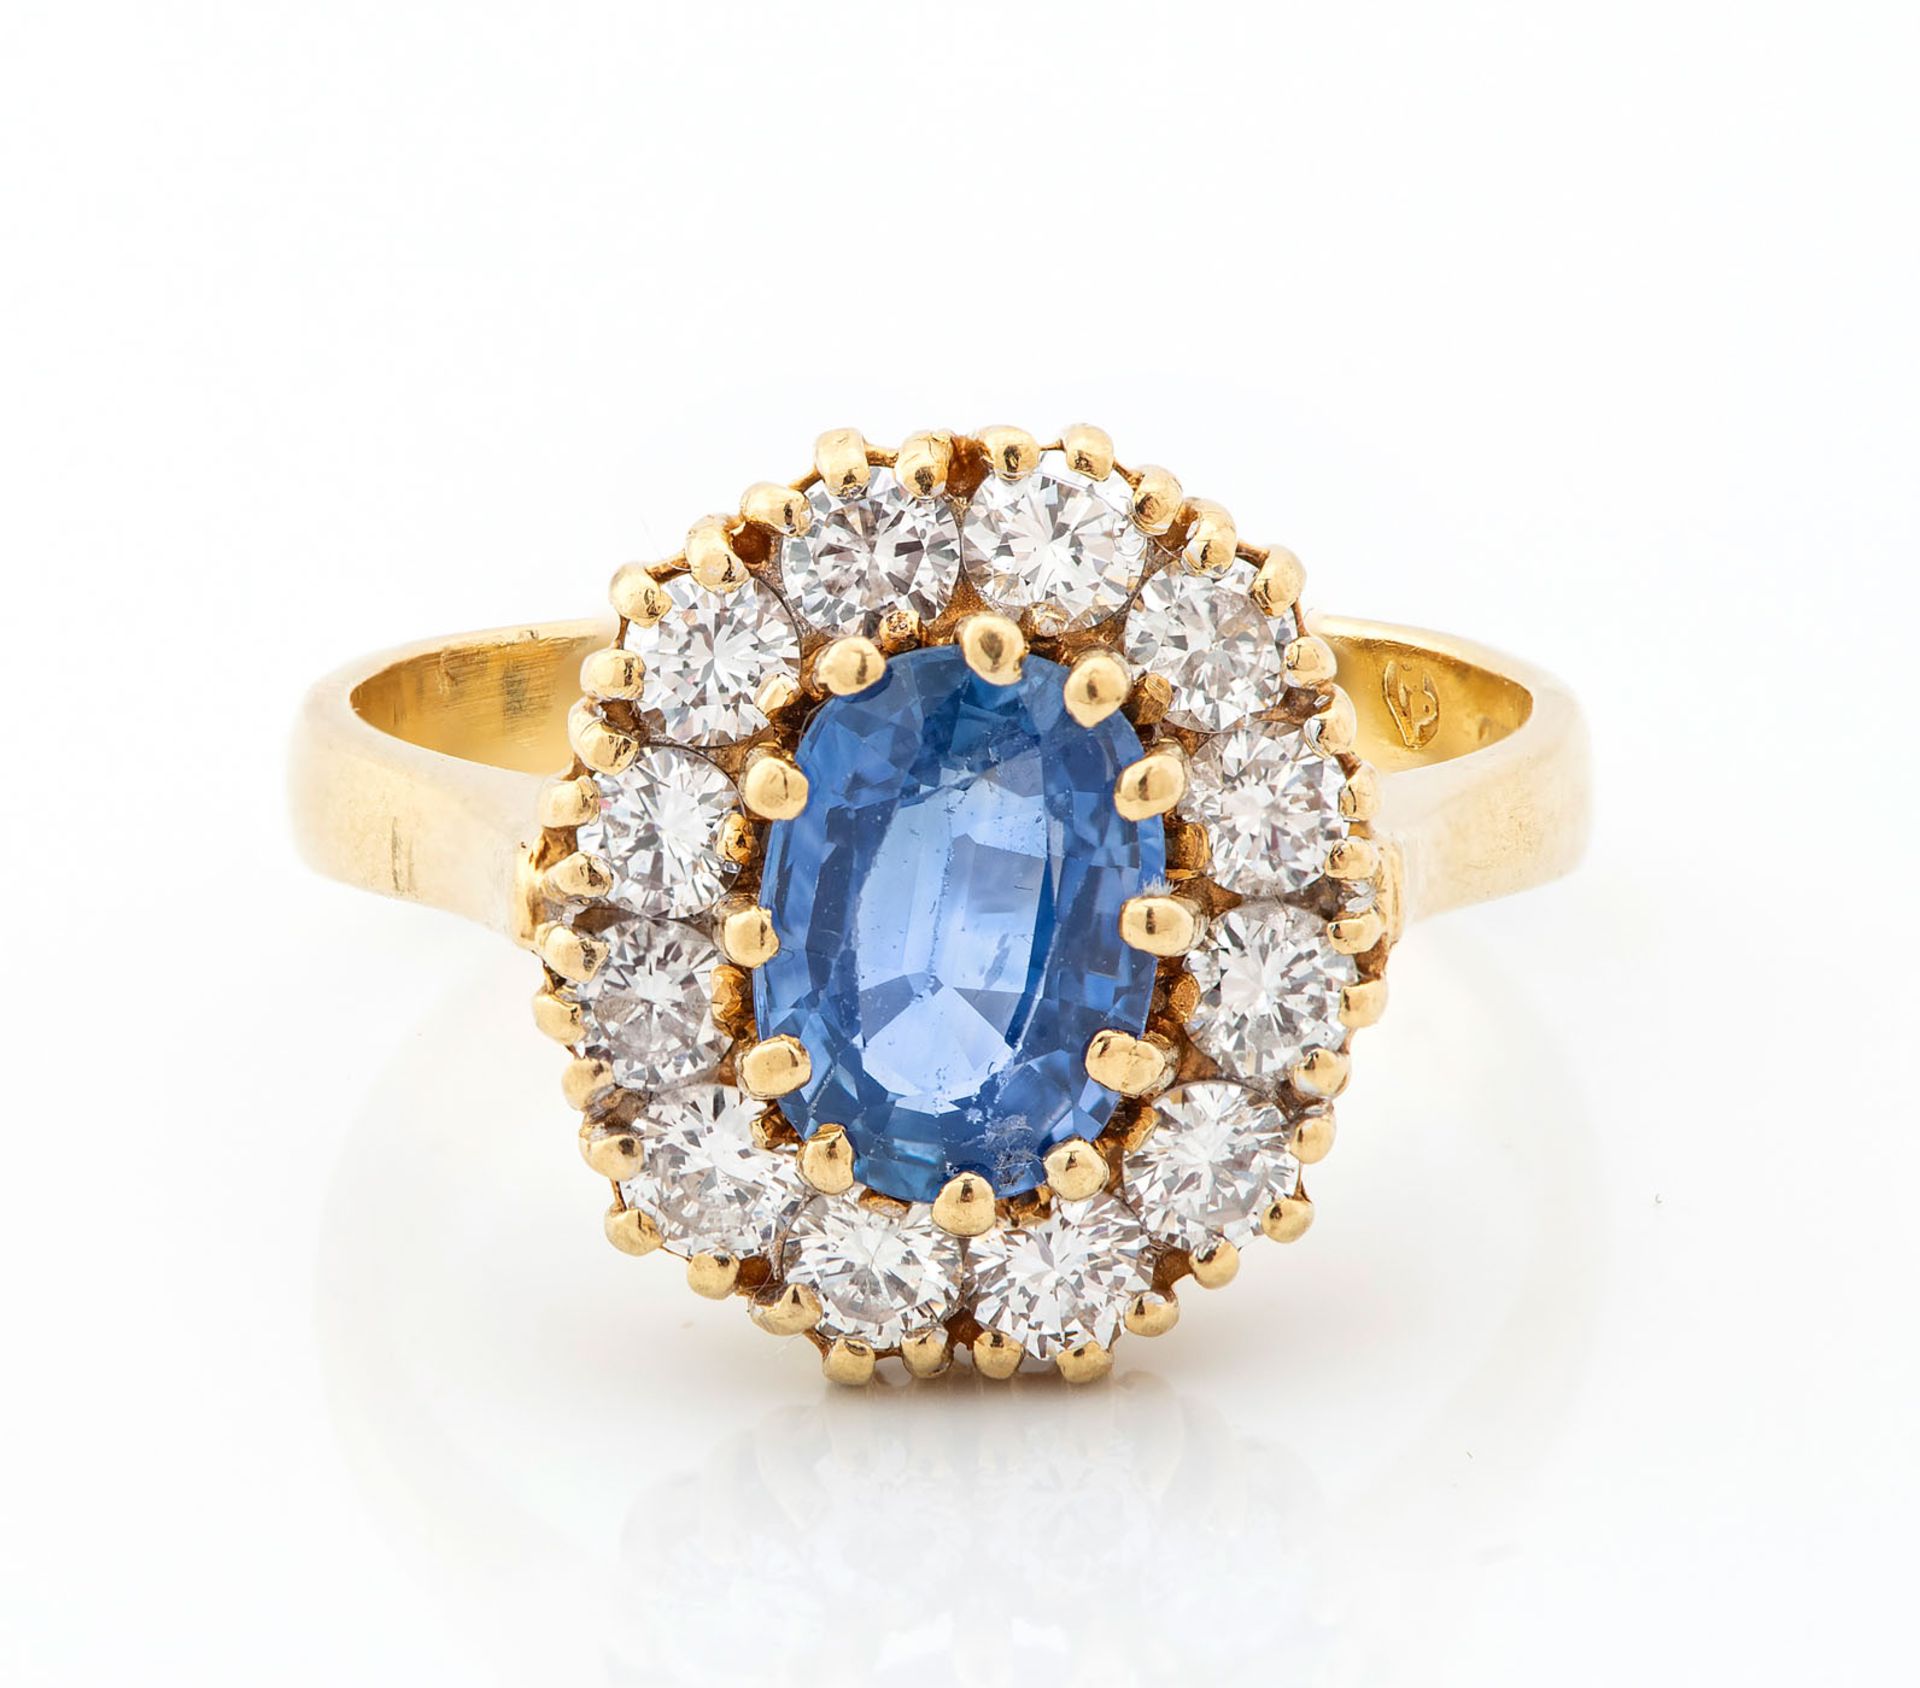 An 18K Gold Diamond and Sapphire Ring - Image 2 of 5